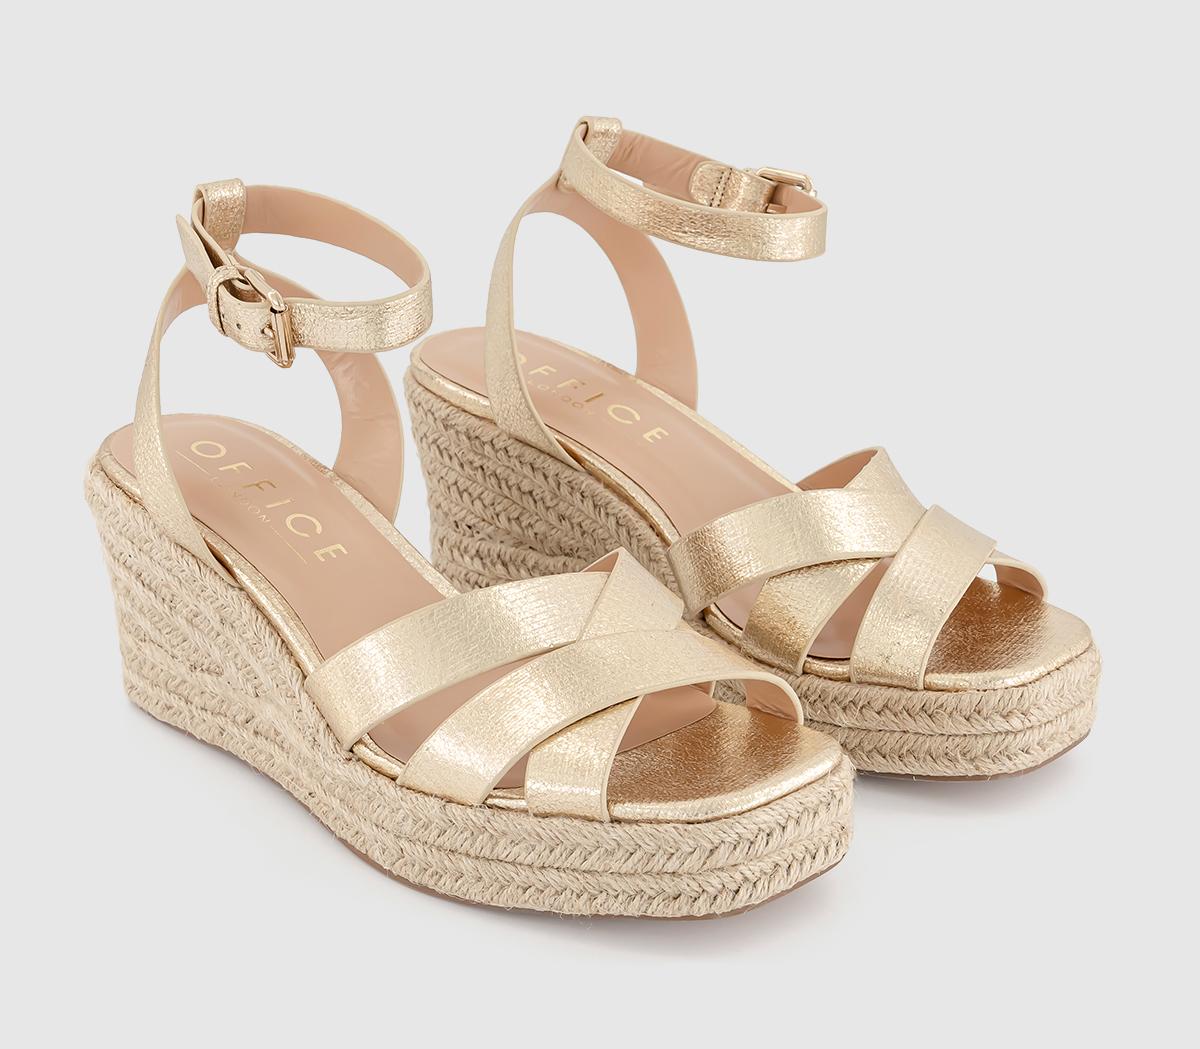 OFFICE Womens Martina Multi Strap Mid Espadrille Wedges Gold, 3